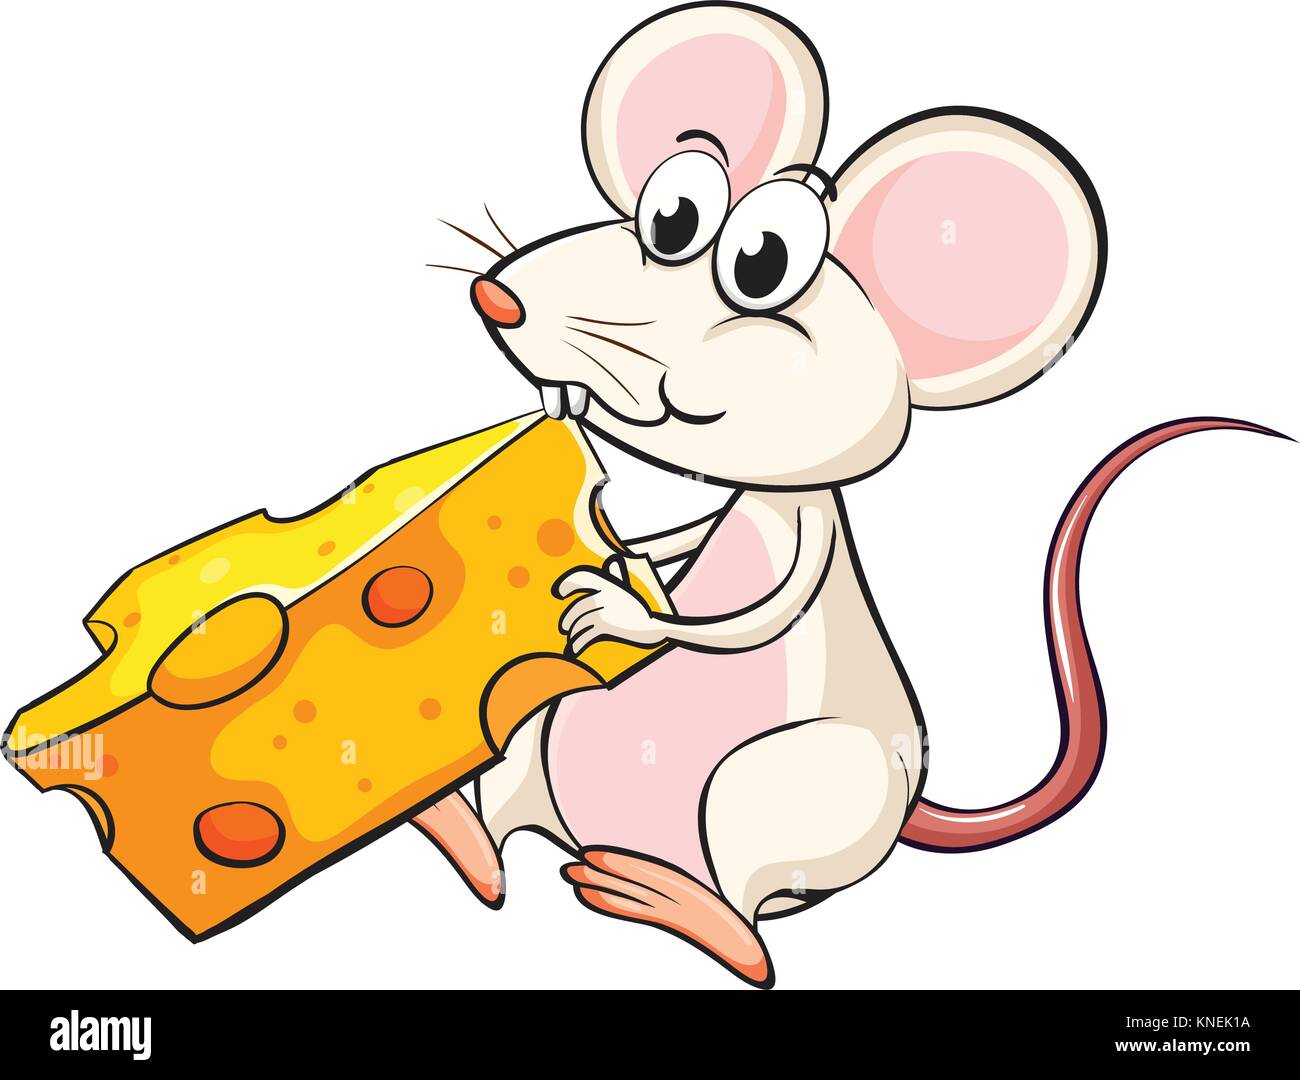 Illustration of a mouse eating cheese on a white background Stock Vector